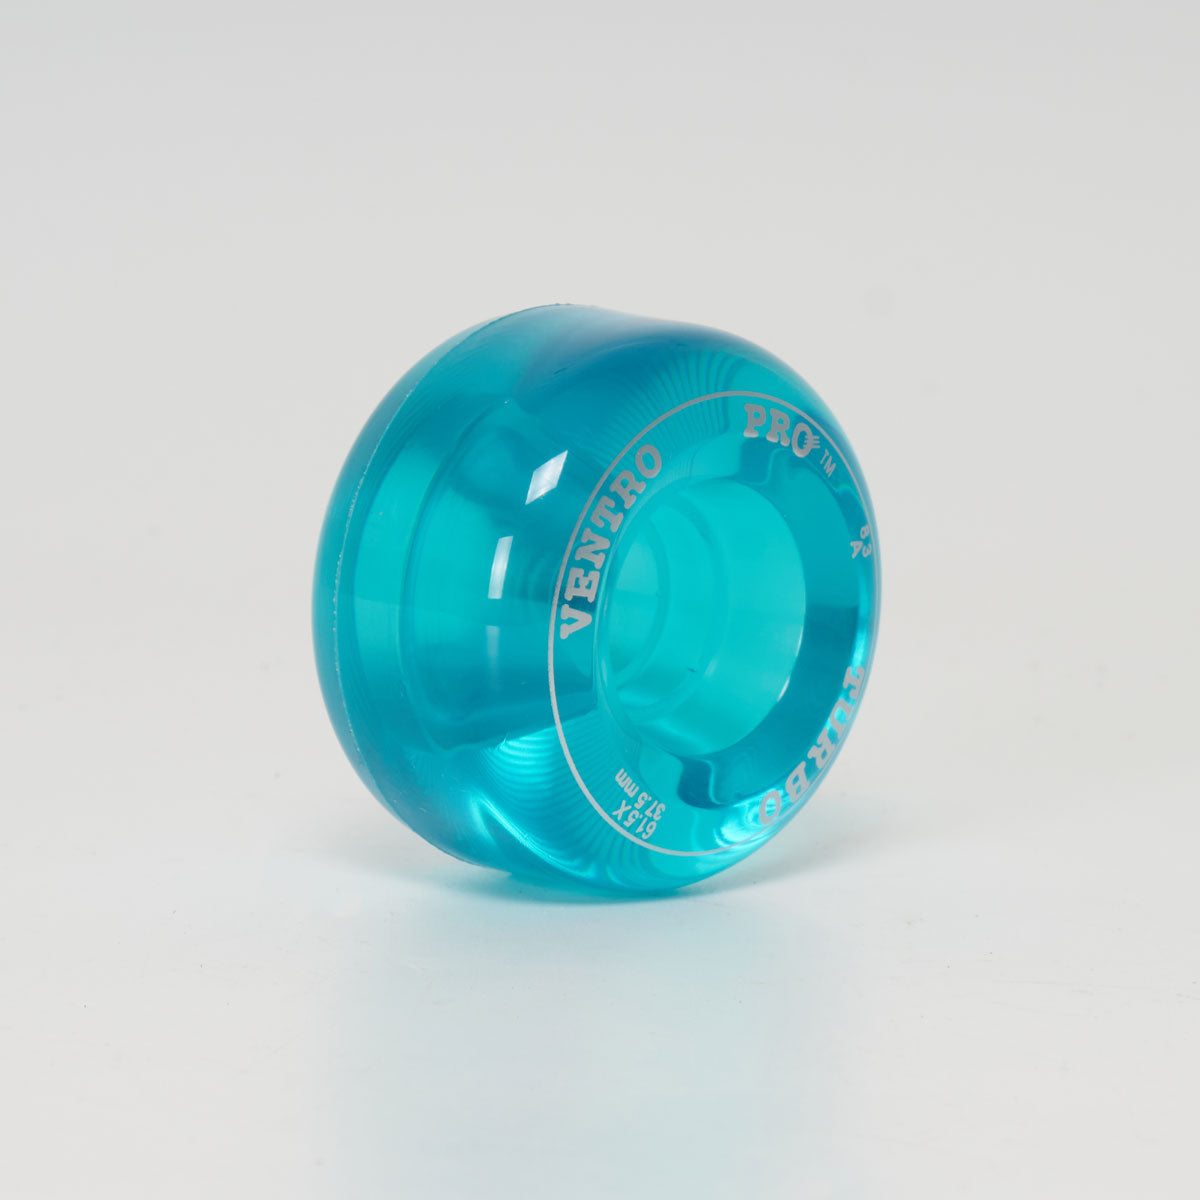 Ventro Pro 61.5mm/83a Wheels - Teal (Singles)